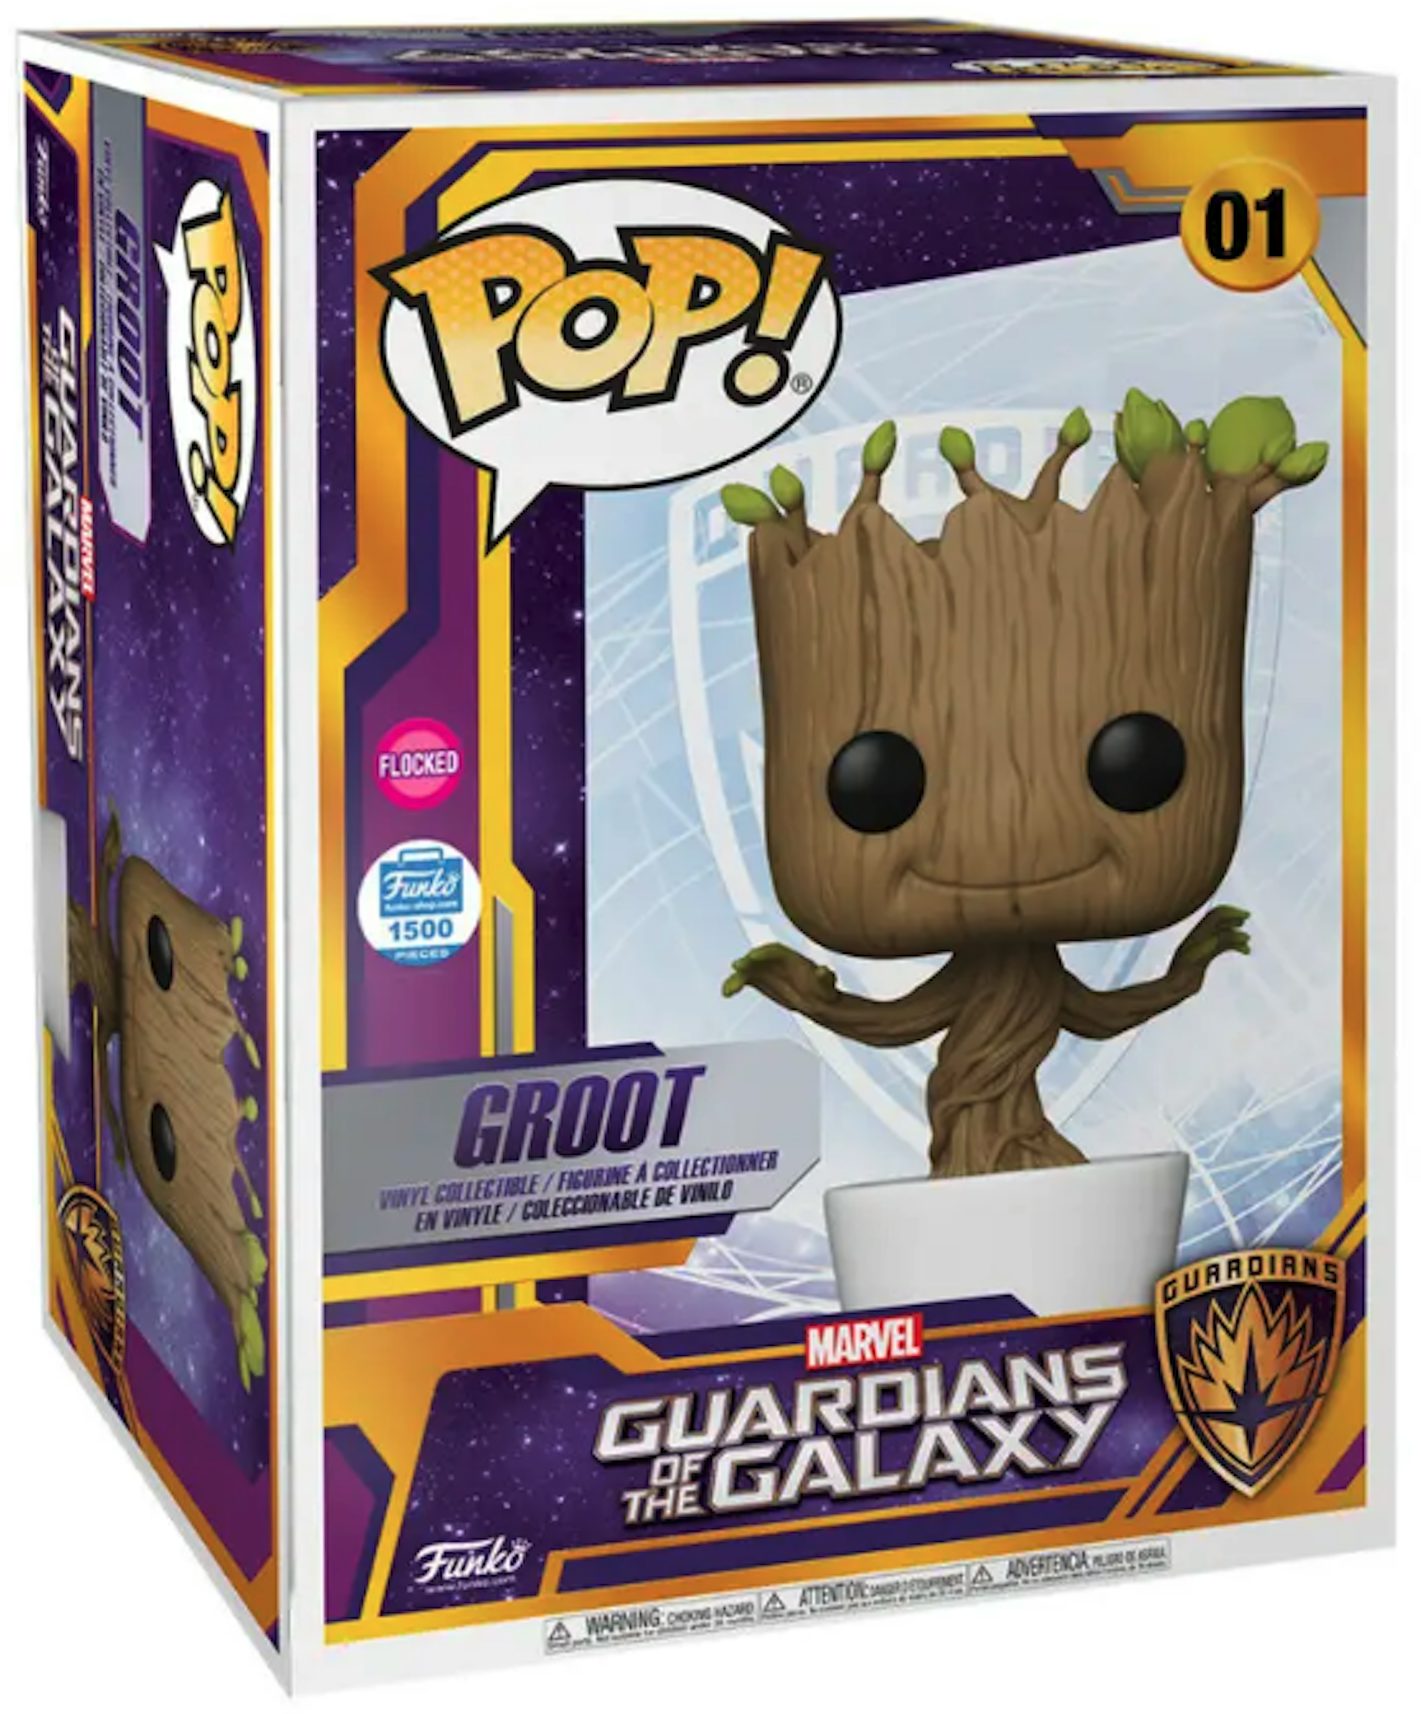 Funko Pop! Marvel Guardians of the Galaxy Groot 18 Inch Flocked Funko Shop  Exclusive Figure #01 - US